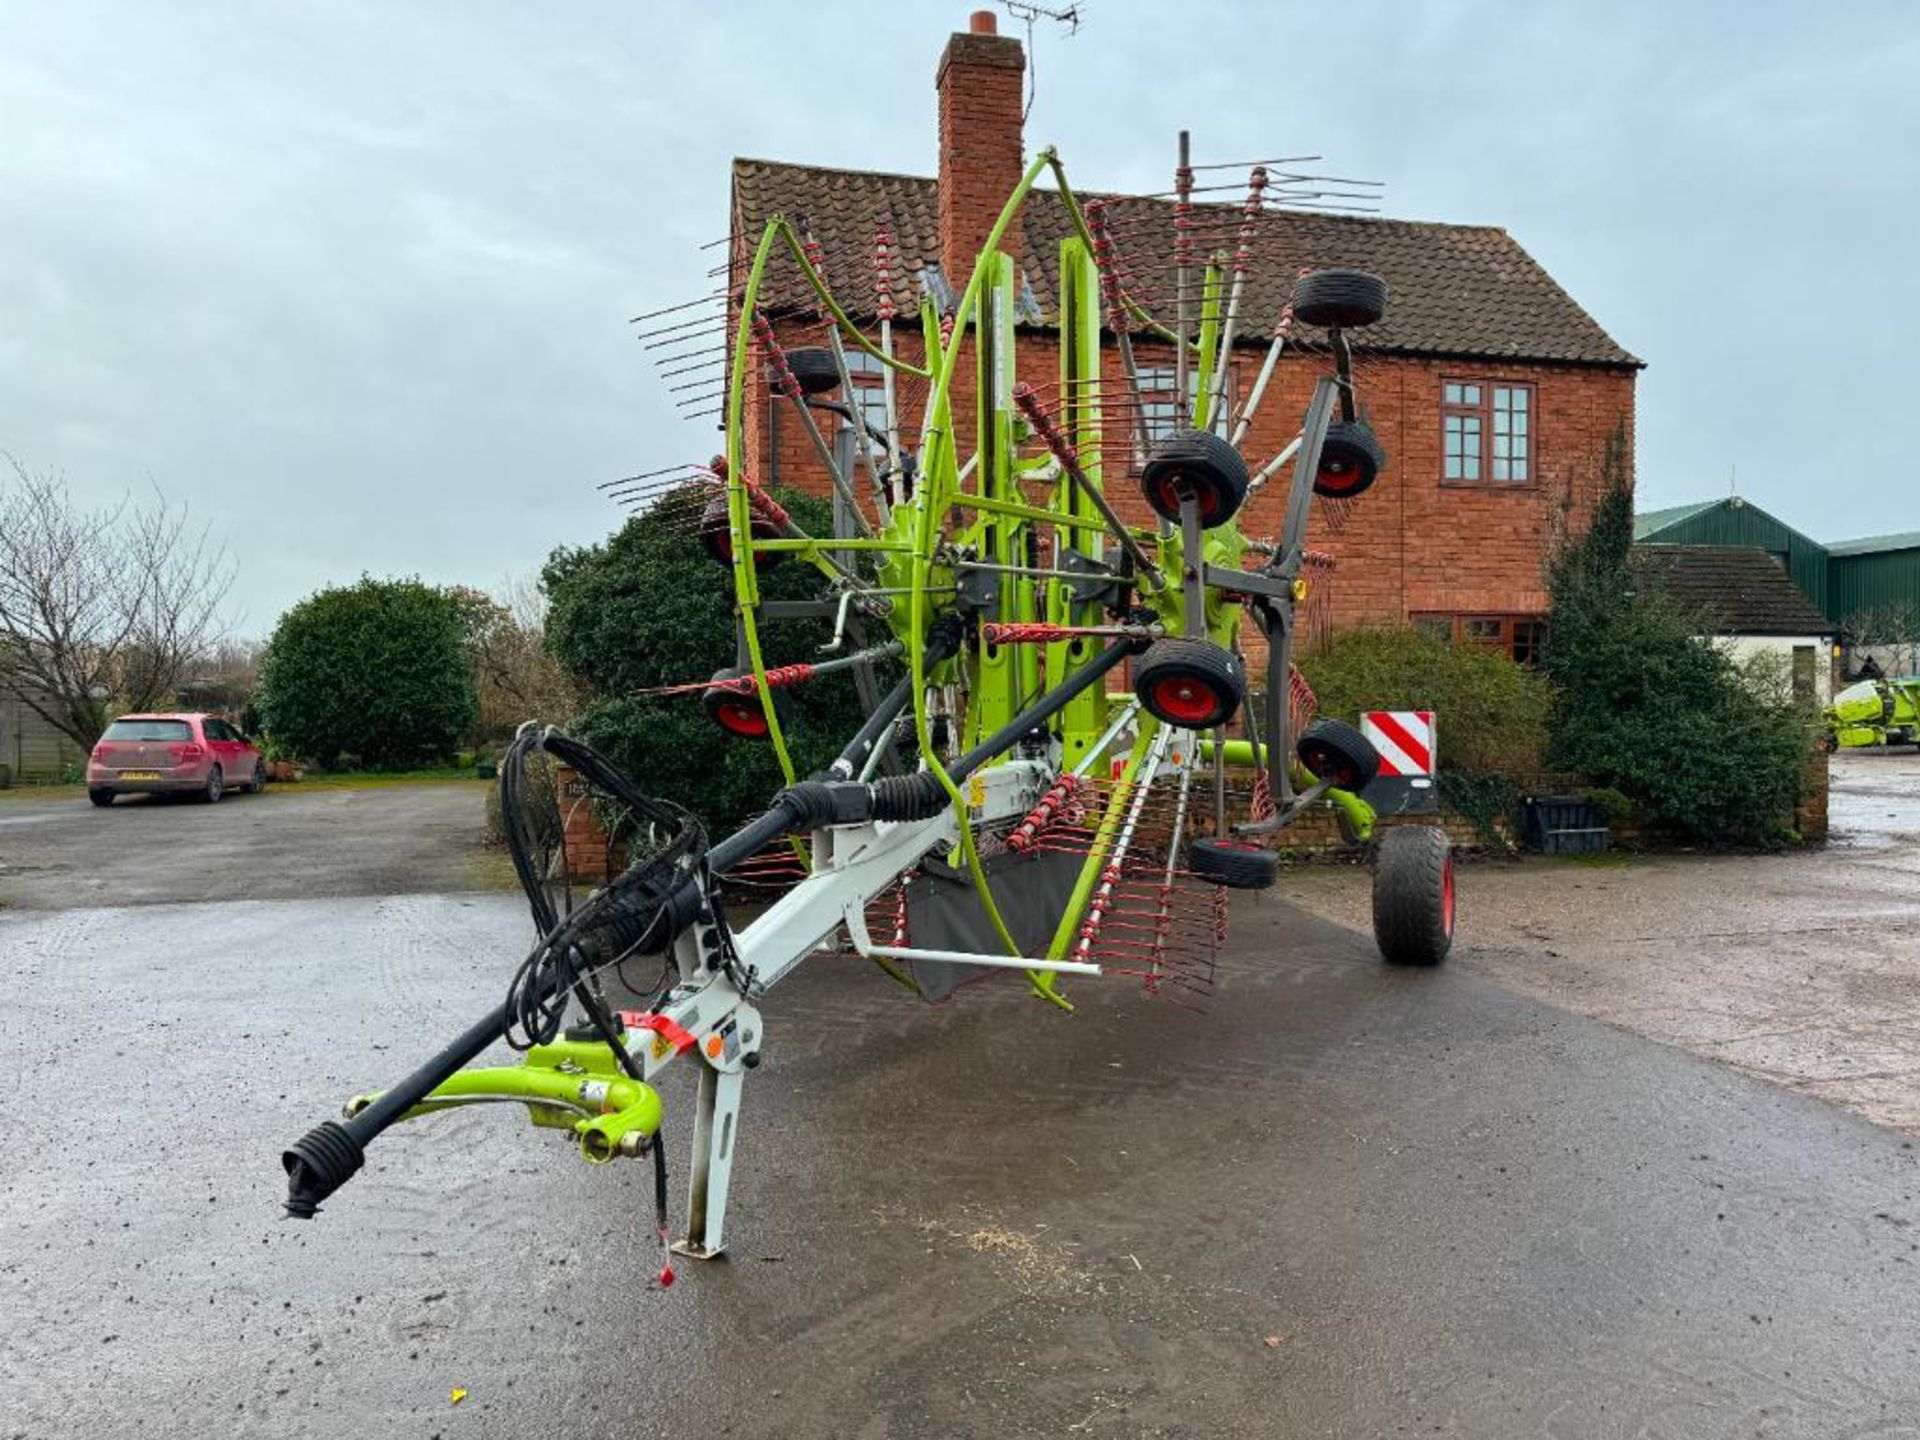 2019 Claas Liner 2900 twin rotor hydraulic folding rake on 15.0/55-17 wheels and tyres. Serial No: W